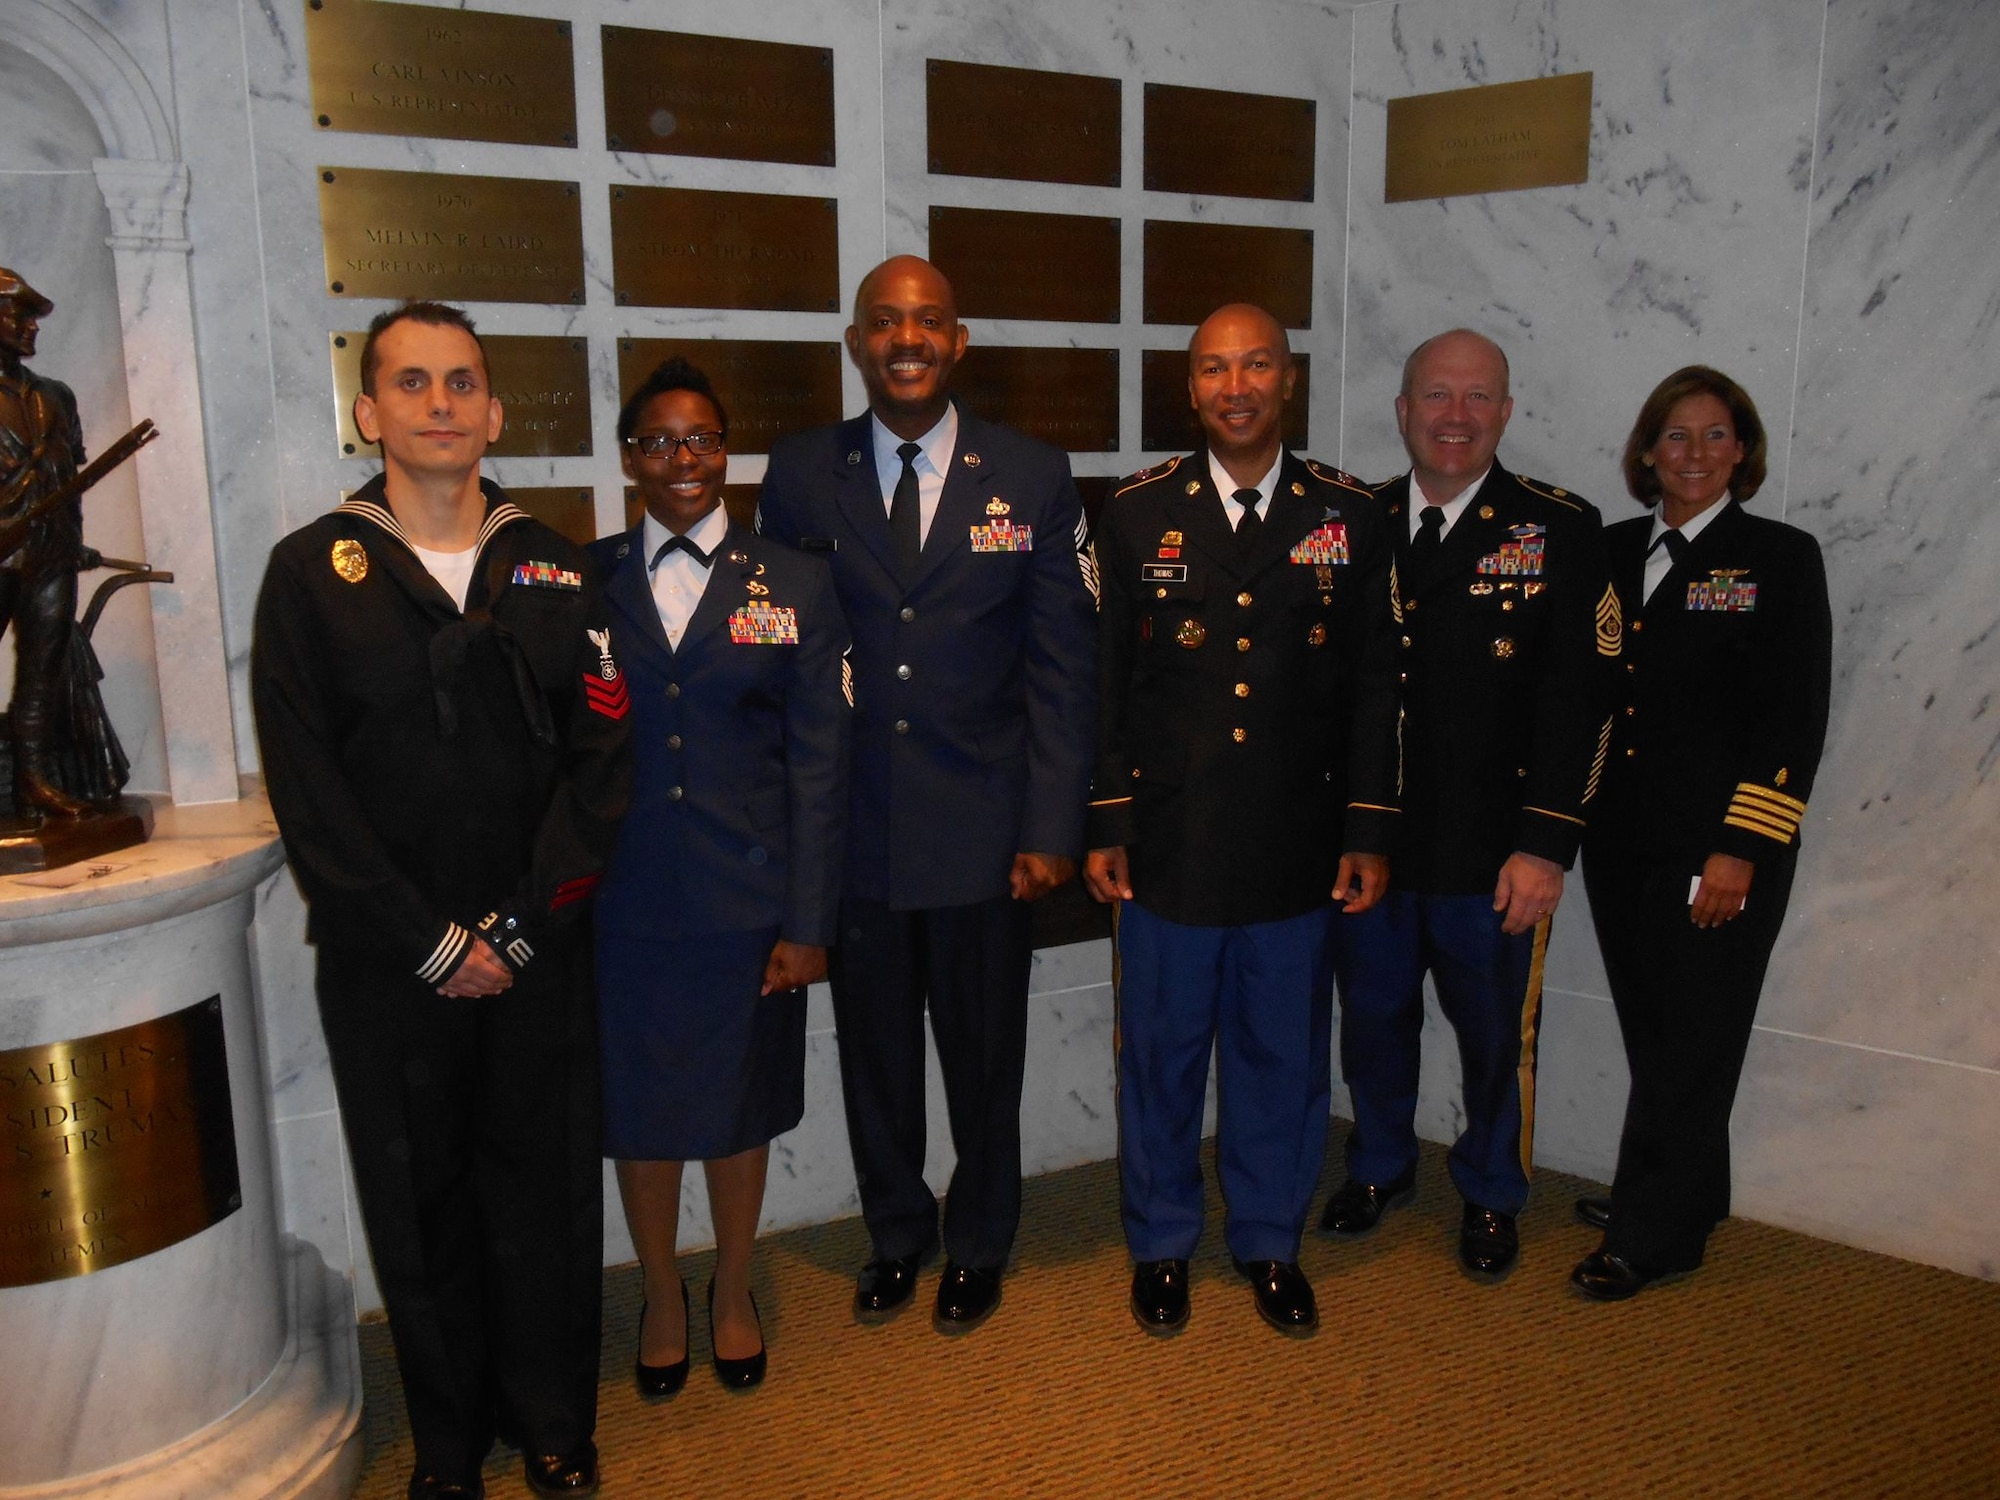 Master Sgt. Thersha Lewis, 459th Civil Engineering Squadron, stands with other members of the armed services who were nominated for the Reserve Officer Association Spotlight award during the ROA's Congressional Breakfast on March 17. The award recognizes the proud men and women who serve in the Reserve Components. (Photo courtesy of ROA)